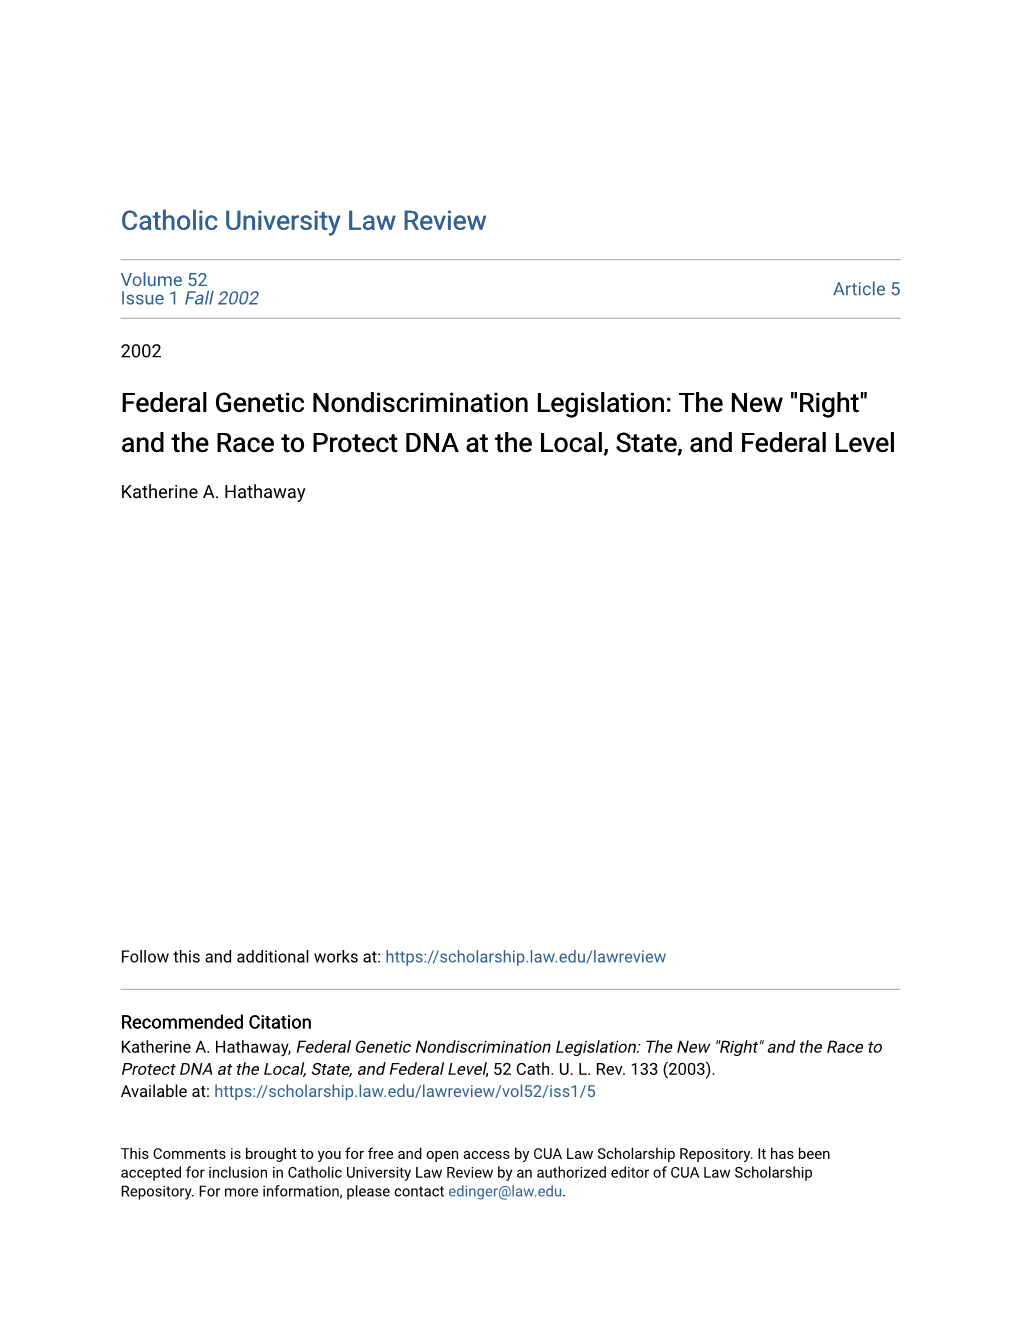 Federal Genetic Nondiscrimination Legislation: the New "Right" and the Race to Protect DNA at the Local, State, and Federal Level